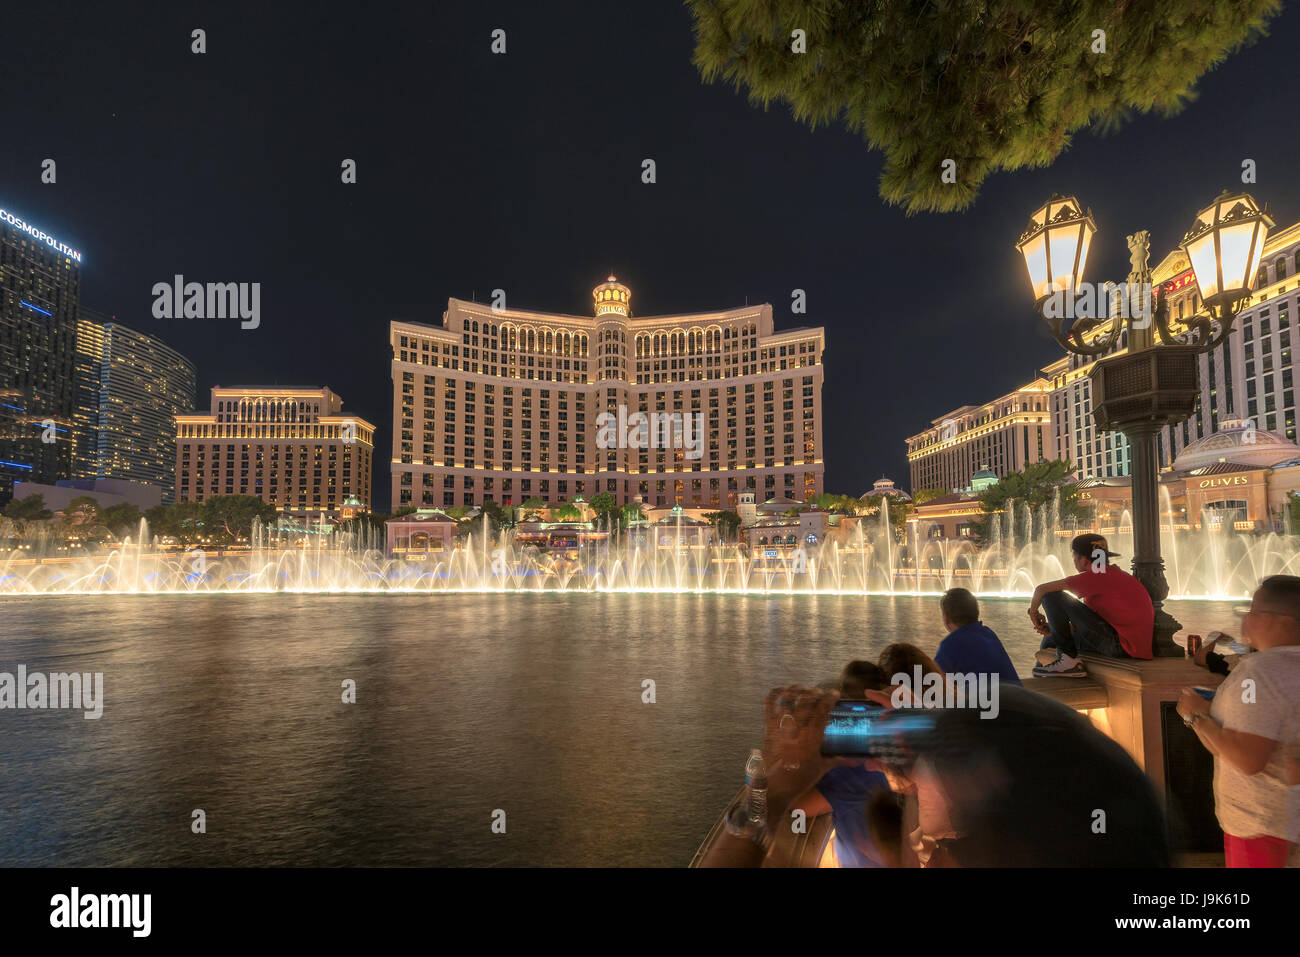 The fountains at Bellagio Hotel and Casino in Las Vegas, Nevada. Stock Photo